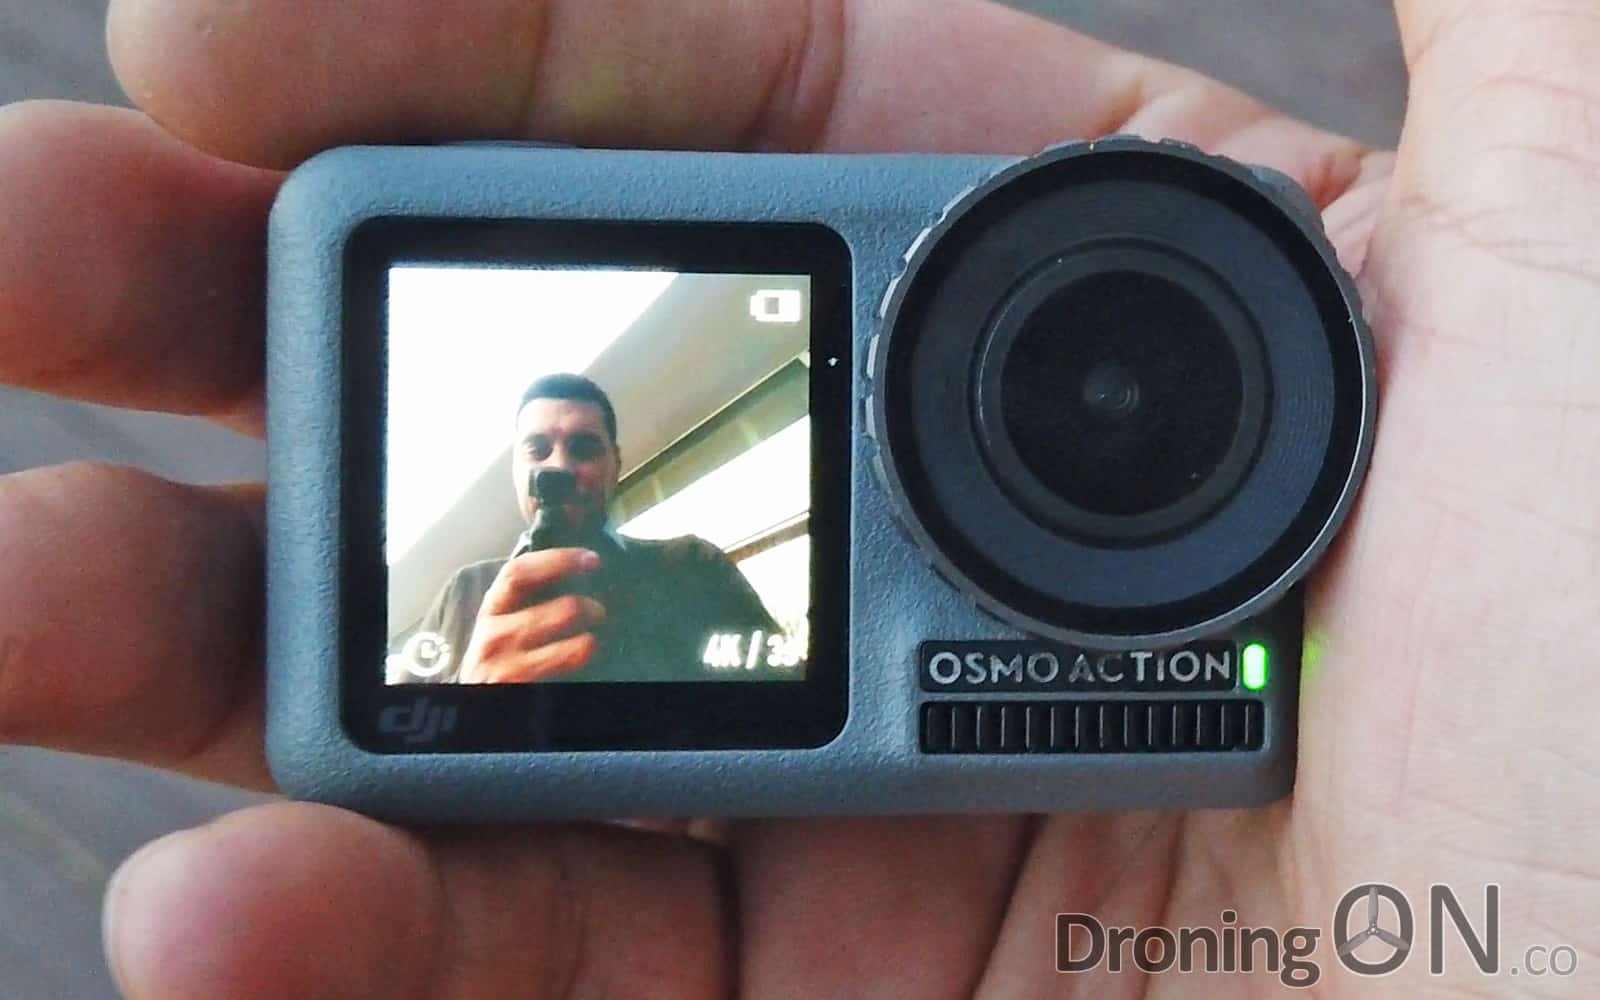 Review of the new DJI Osmo Action camera